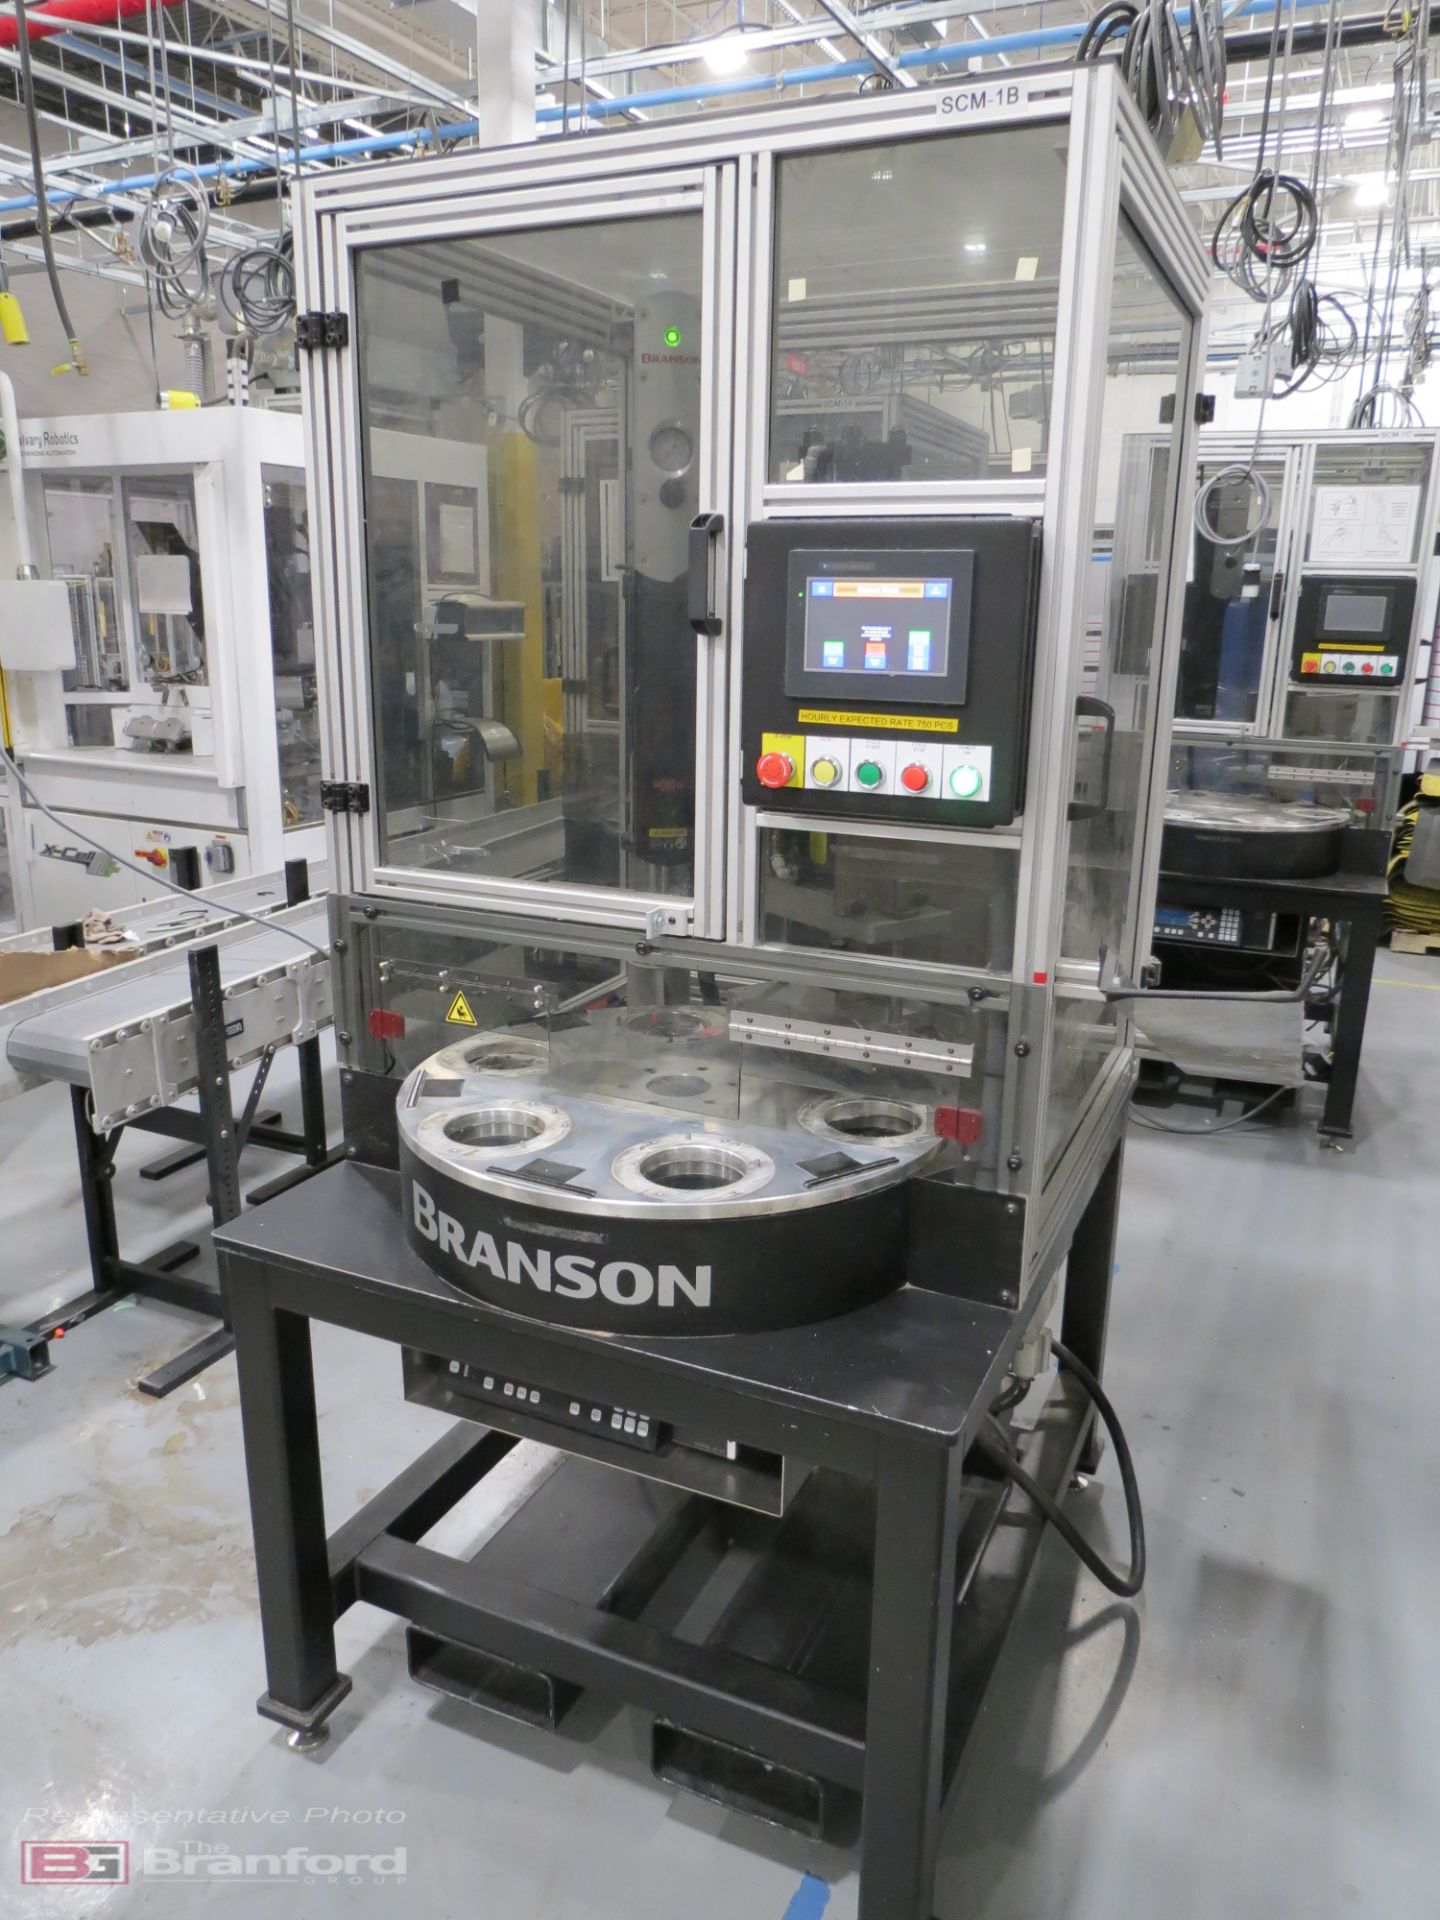 Branson 2000X Series 40 Rotary 'Seal and Cut' Ultrasonic Plastic Welding Assembly System (2020) - Image 2 of 11